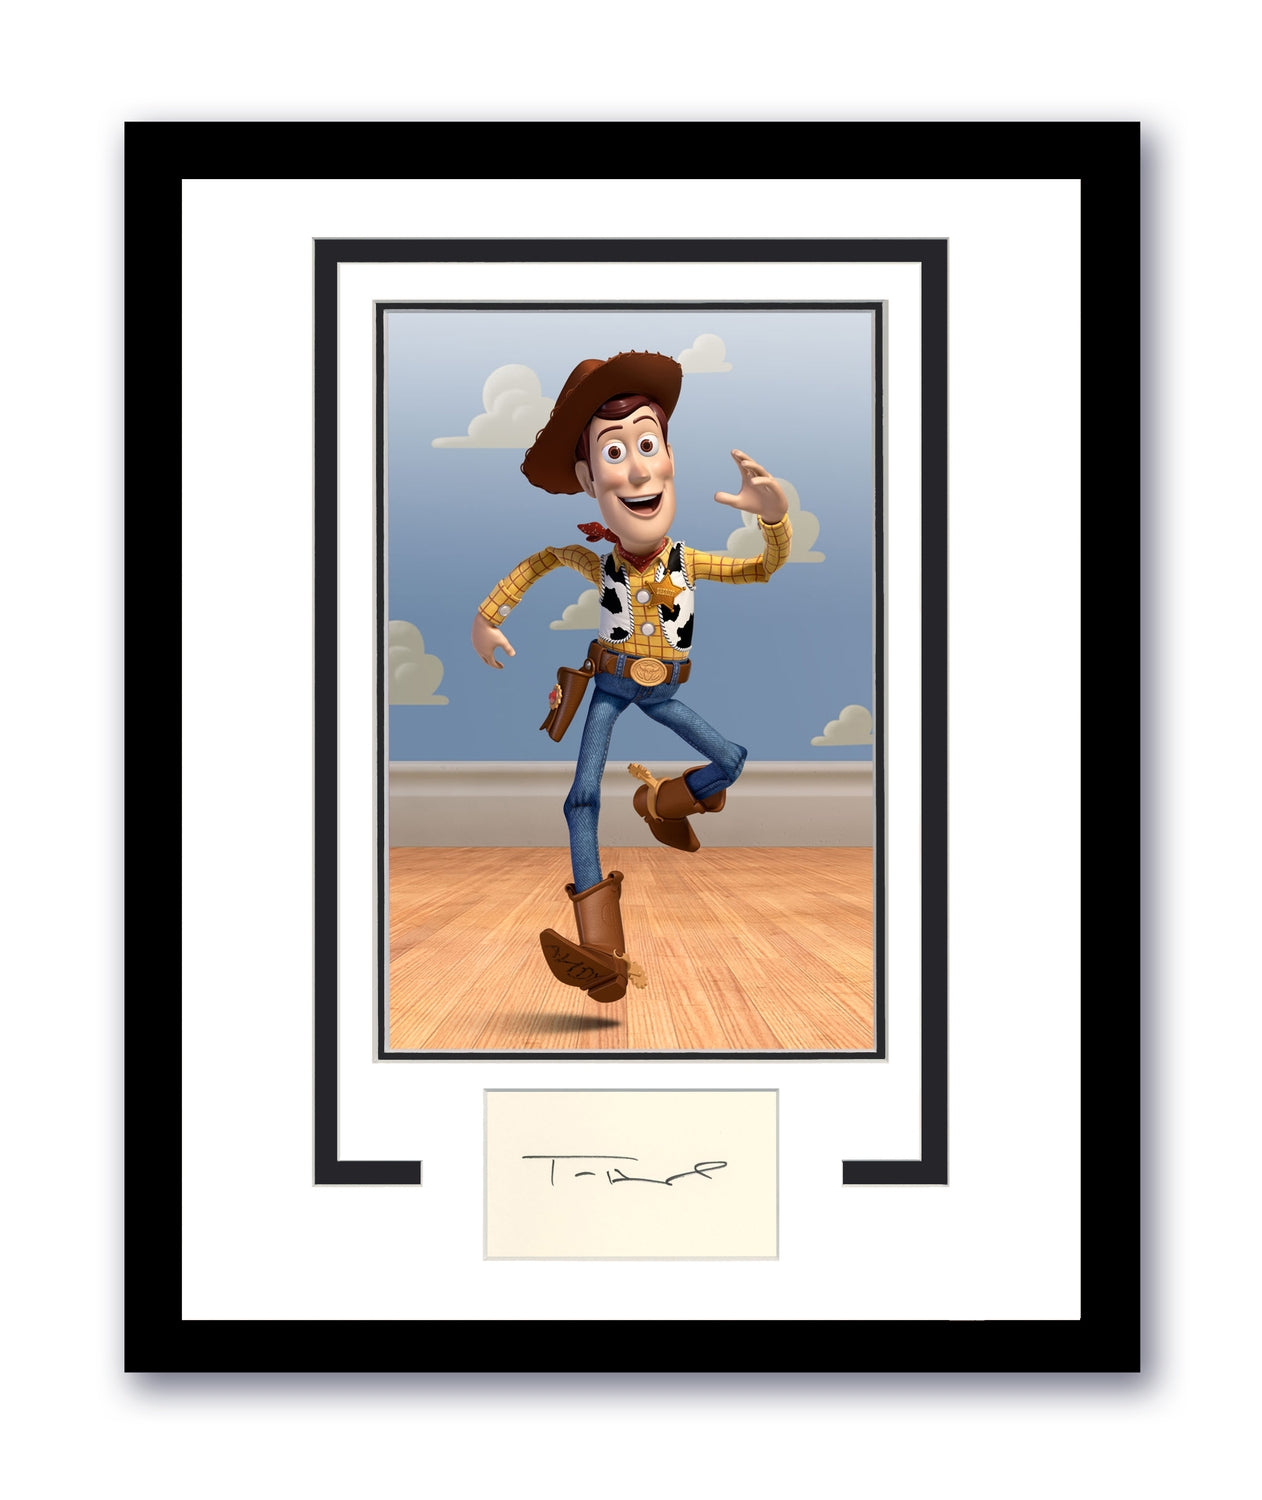 Tom Hanks Autographed Signed Cut 11x14 Framed Toy Story Woody ACOA